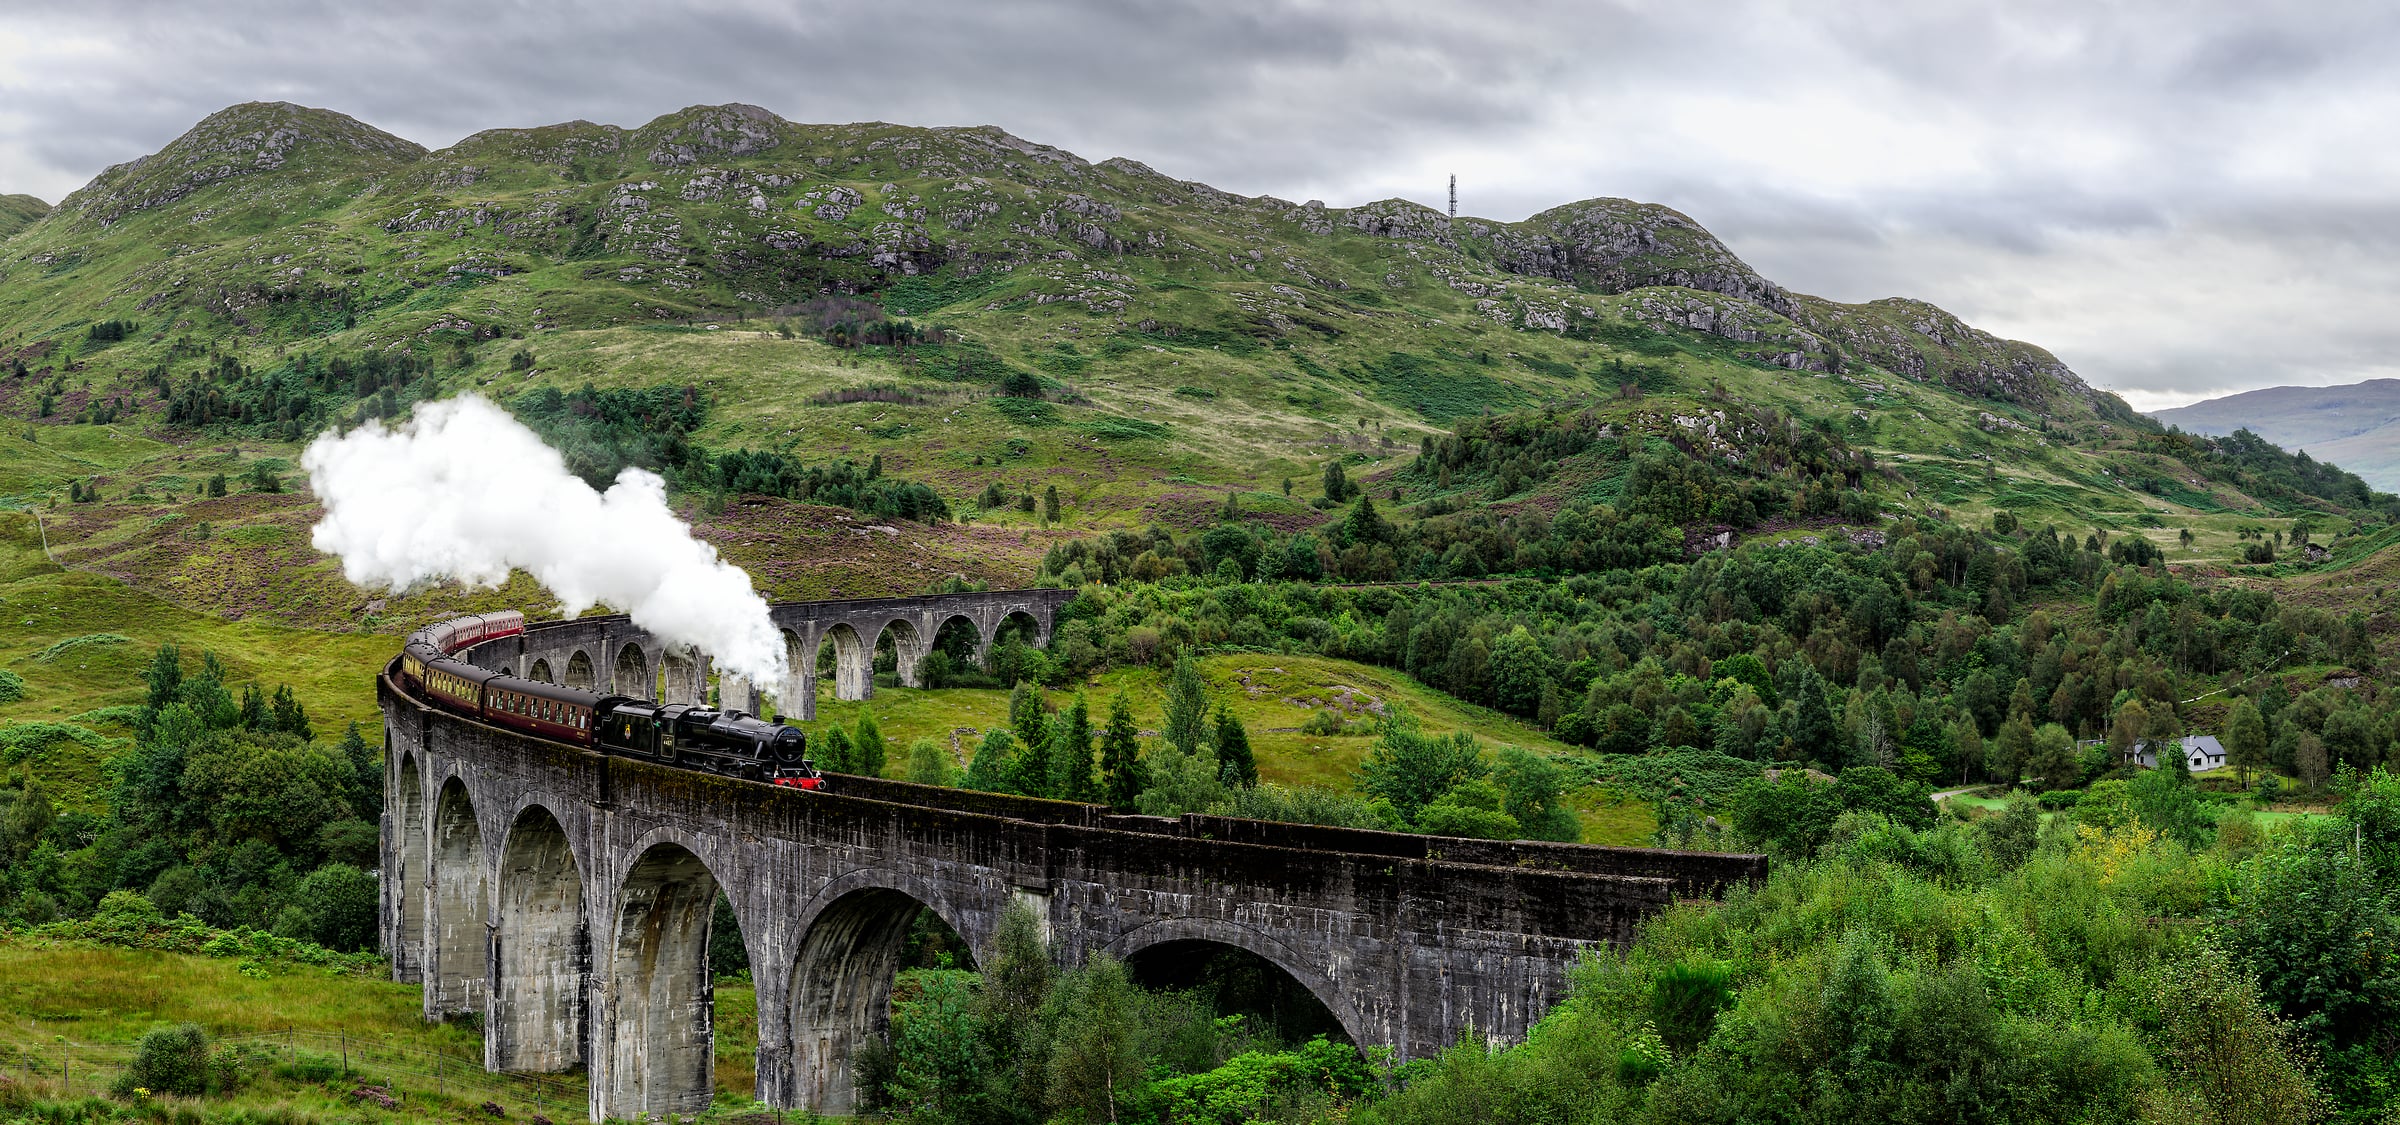 936 megapixels! A very high resolution, large-format VAST photo print of the Jacobite railroad train steam locomotive going across the Glenfinnan Viaduct railroad bridge; photograph created by Scott Dimond in Glenfinnan Viaduct, United Kingdom.